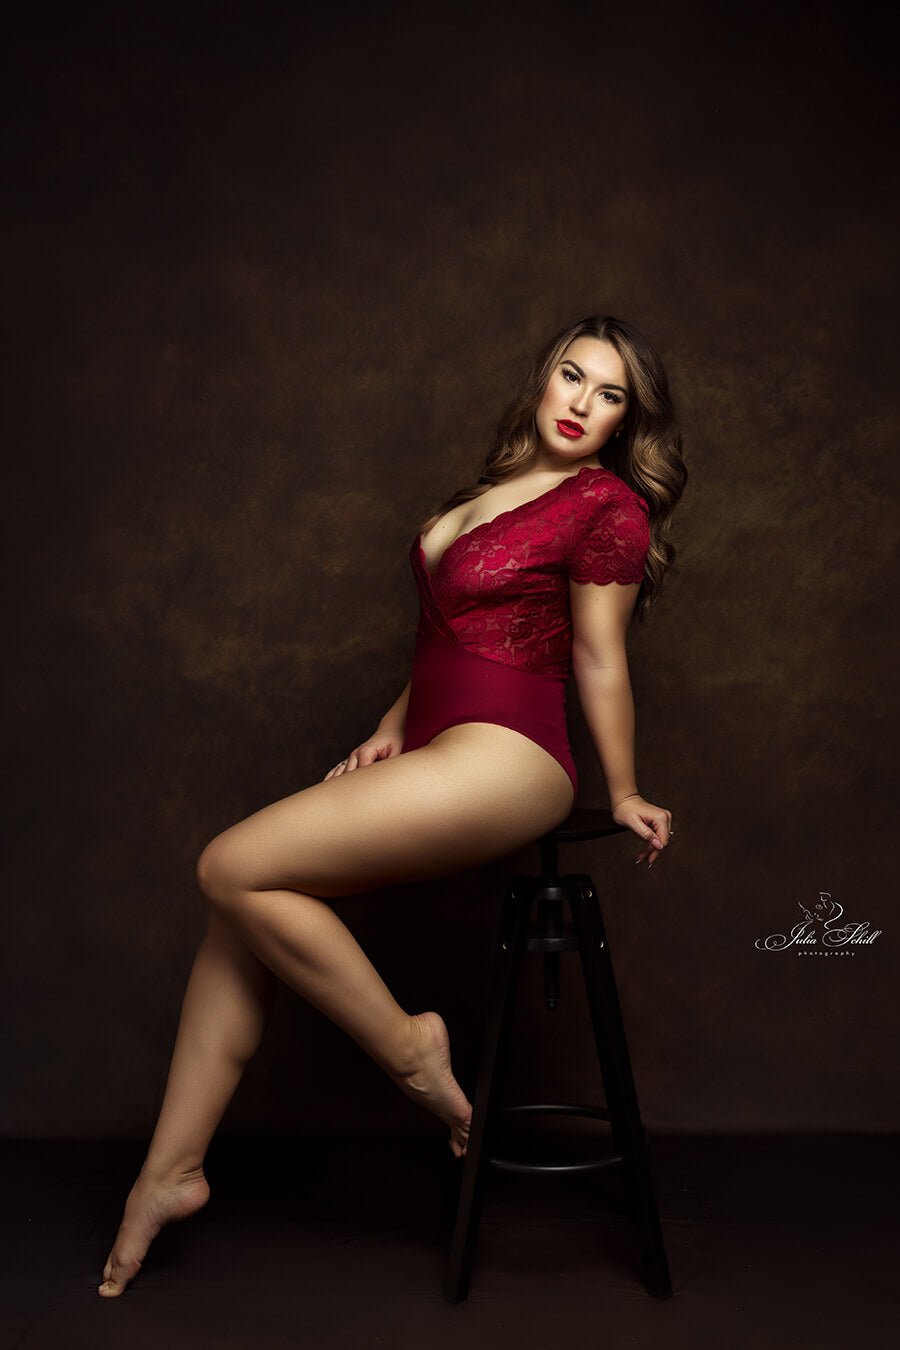 dark blond model poses in a studio, sitting on a high black chair. she is wearing a red bodysuit during a boudoir session.